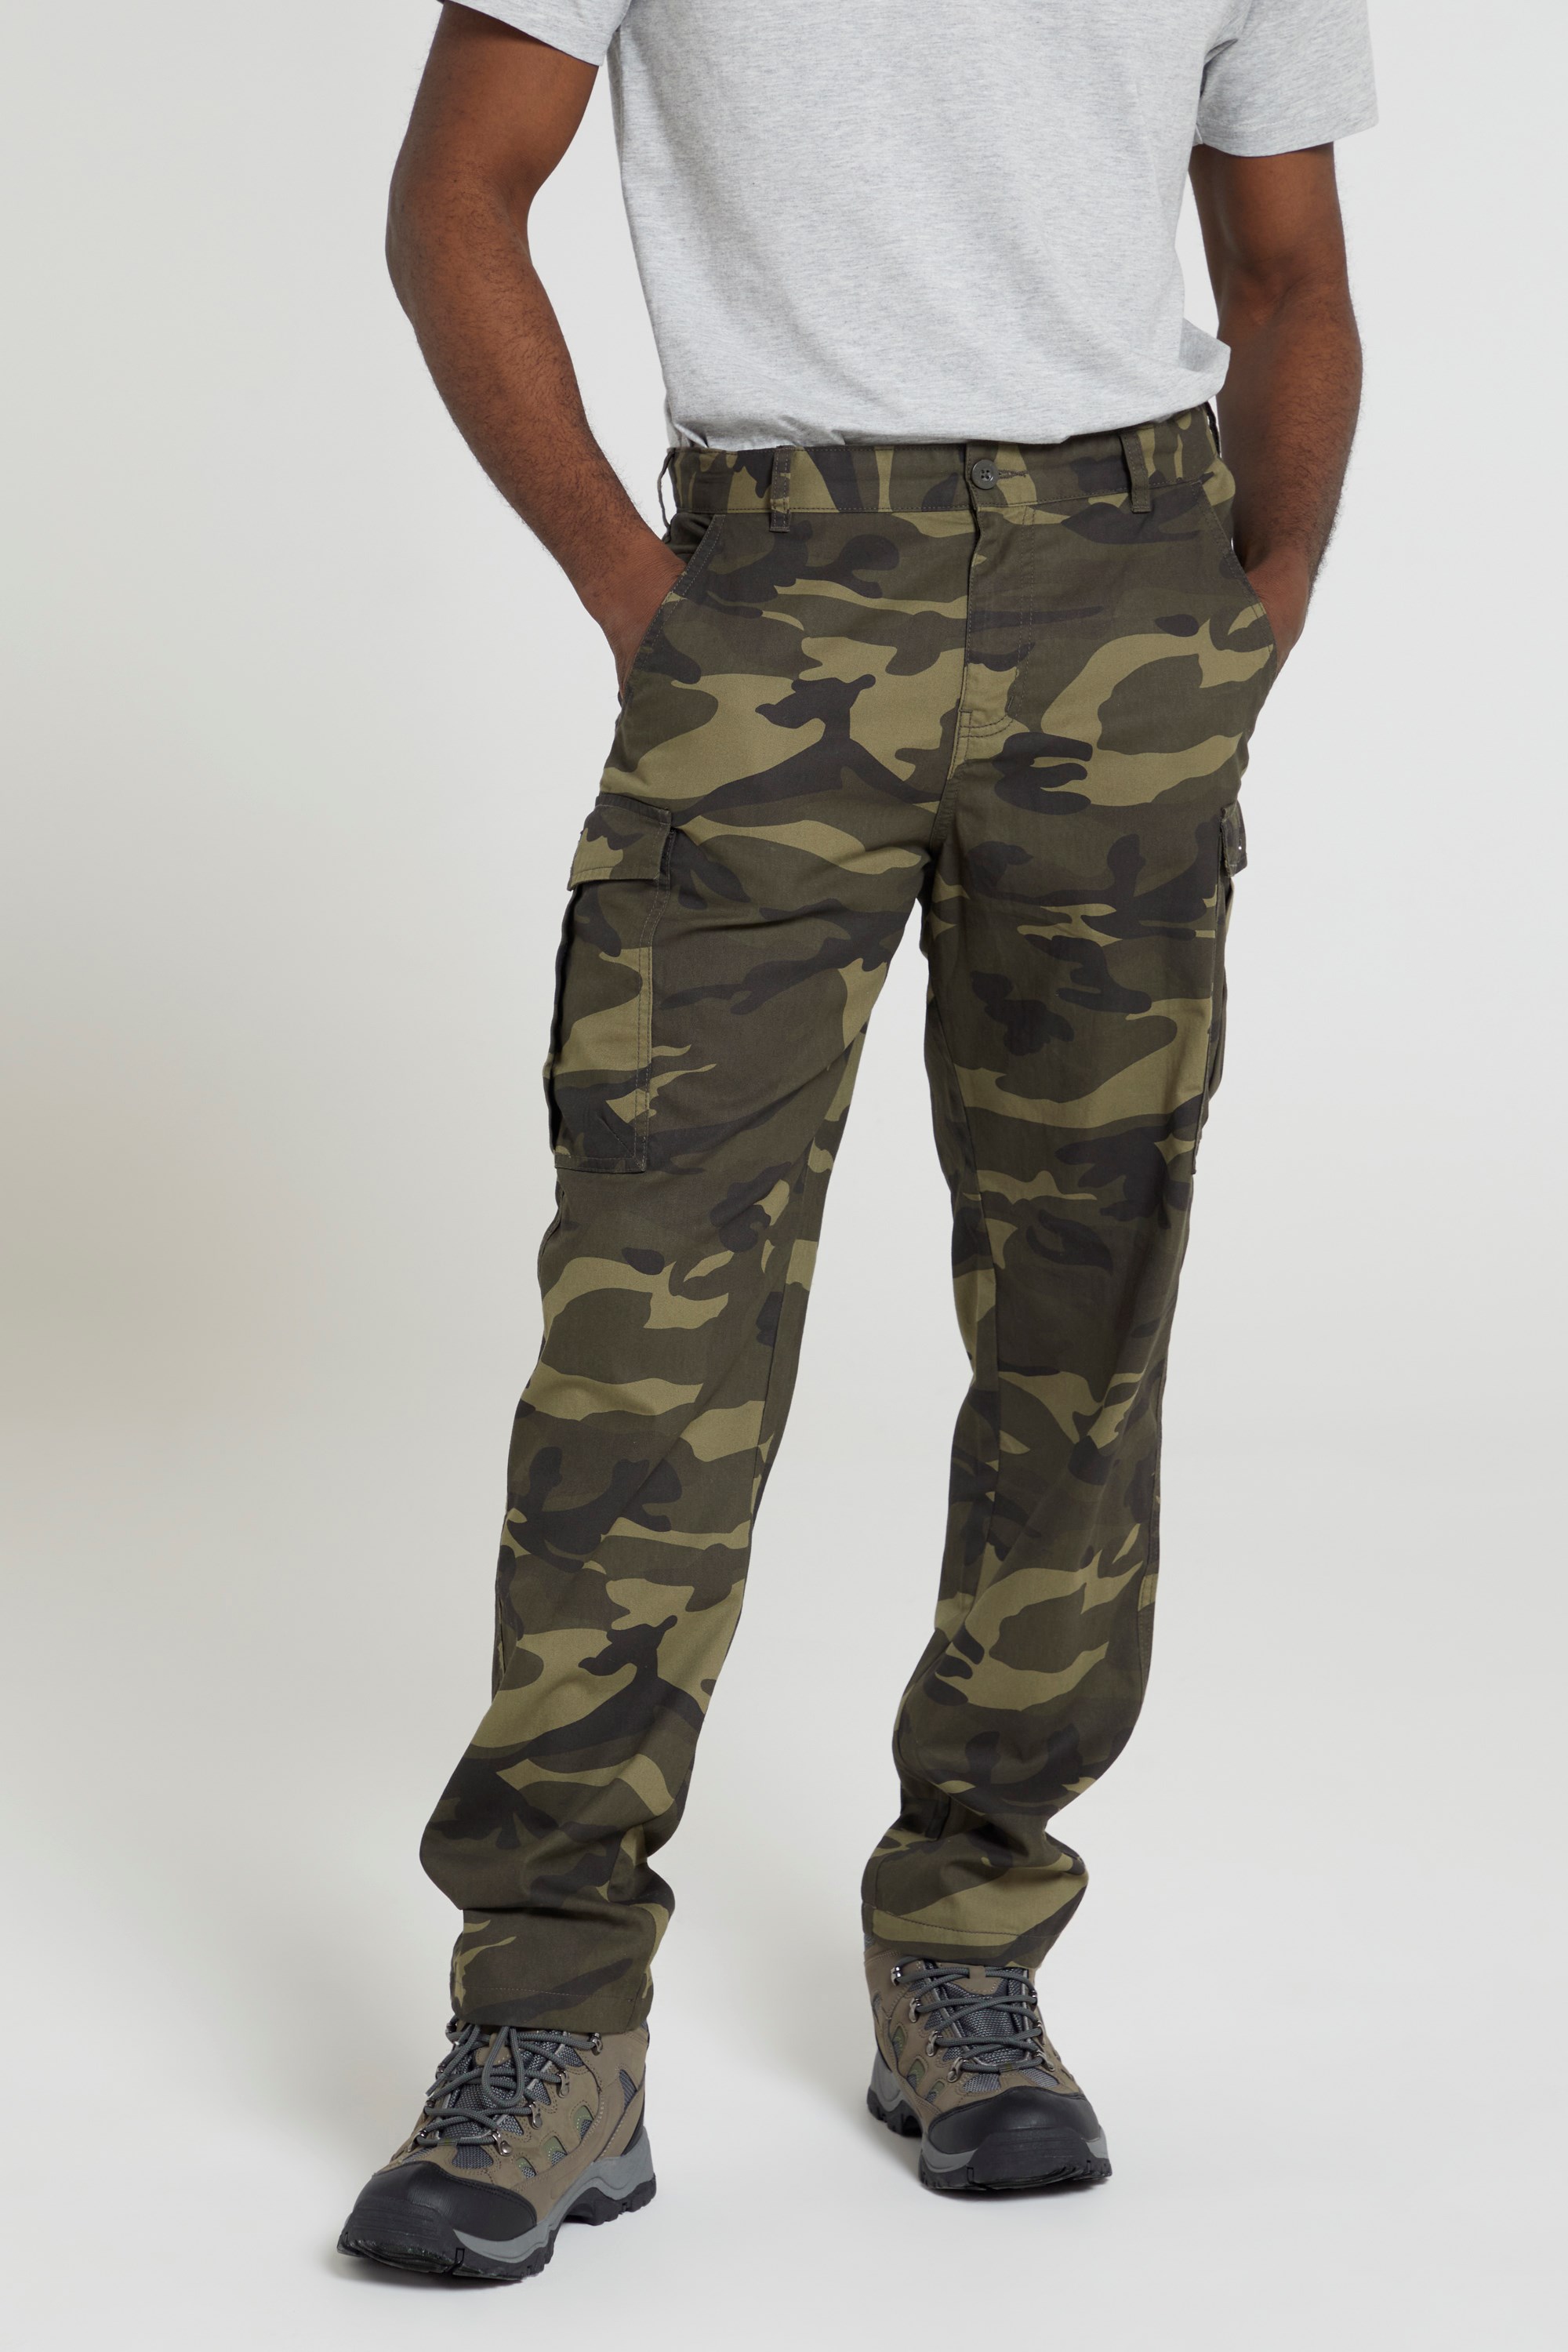 Multicolor Polystercotton Camouflage Cargo Pant - Camouflage Fabric - Army  Uniform, 240-250 at Rs 800/piece in Ludhiana